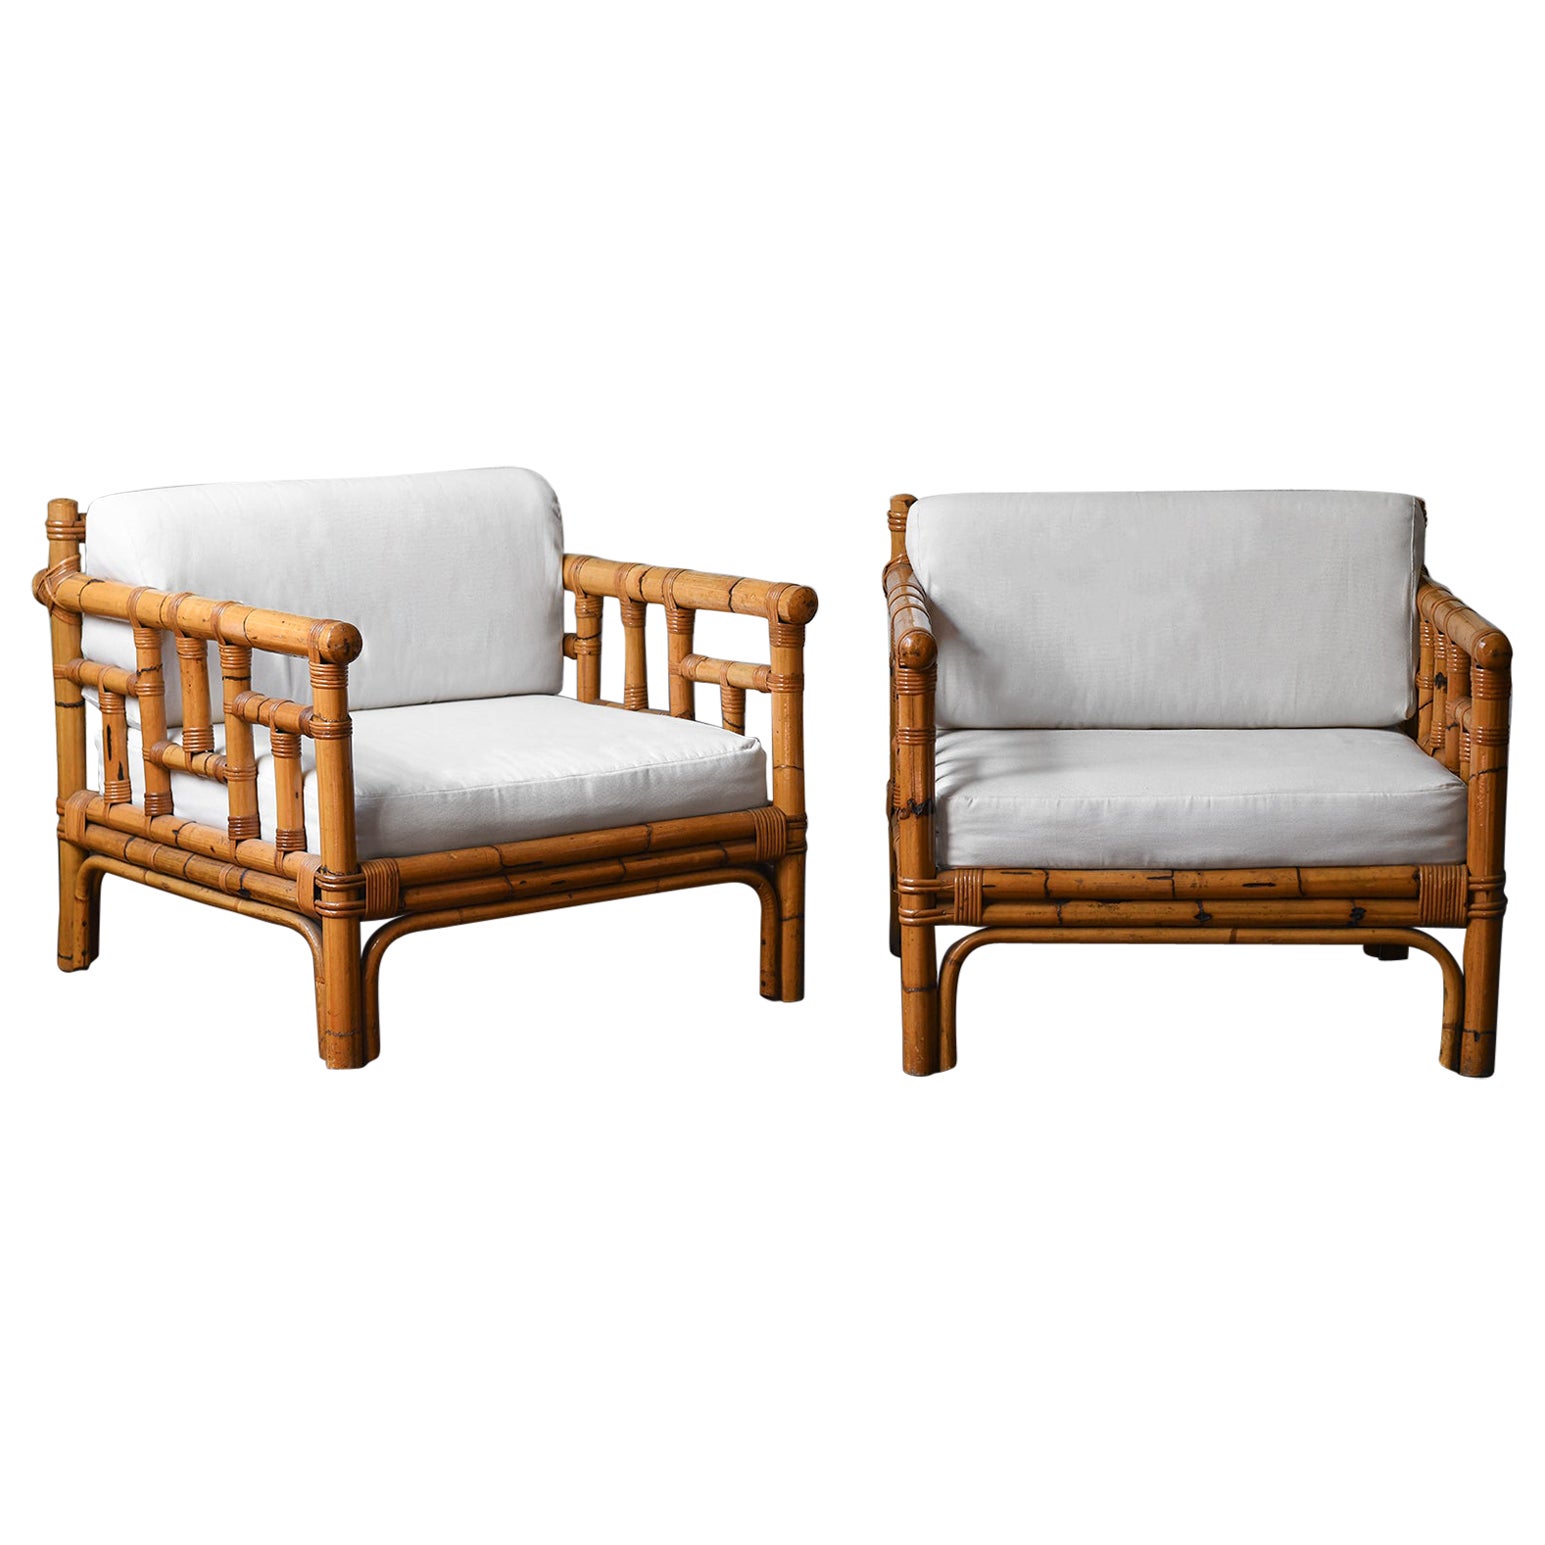 Pair of Vivai Del Sud rush armchairs complete with cushions, Italy 1970